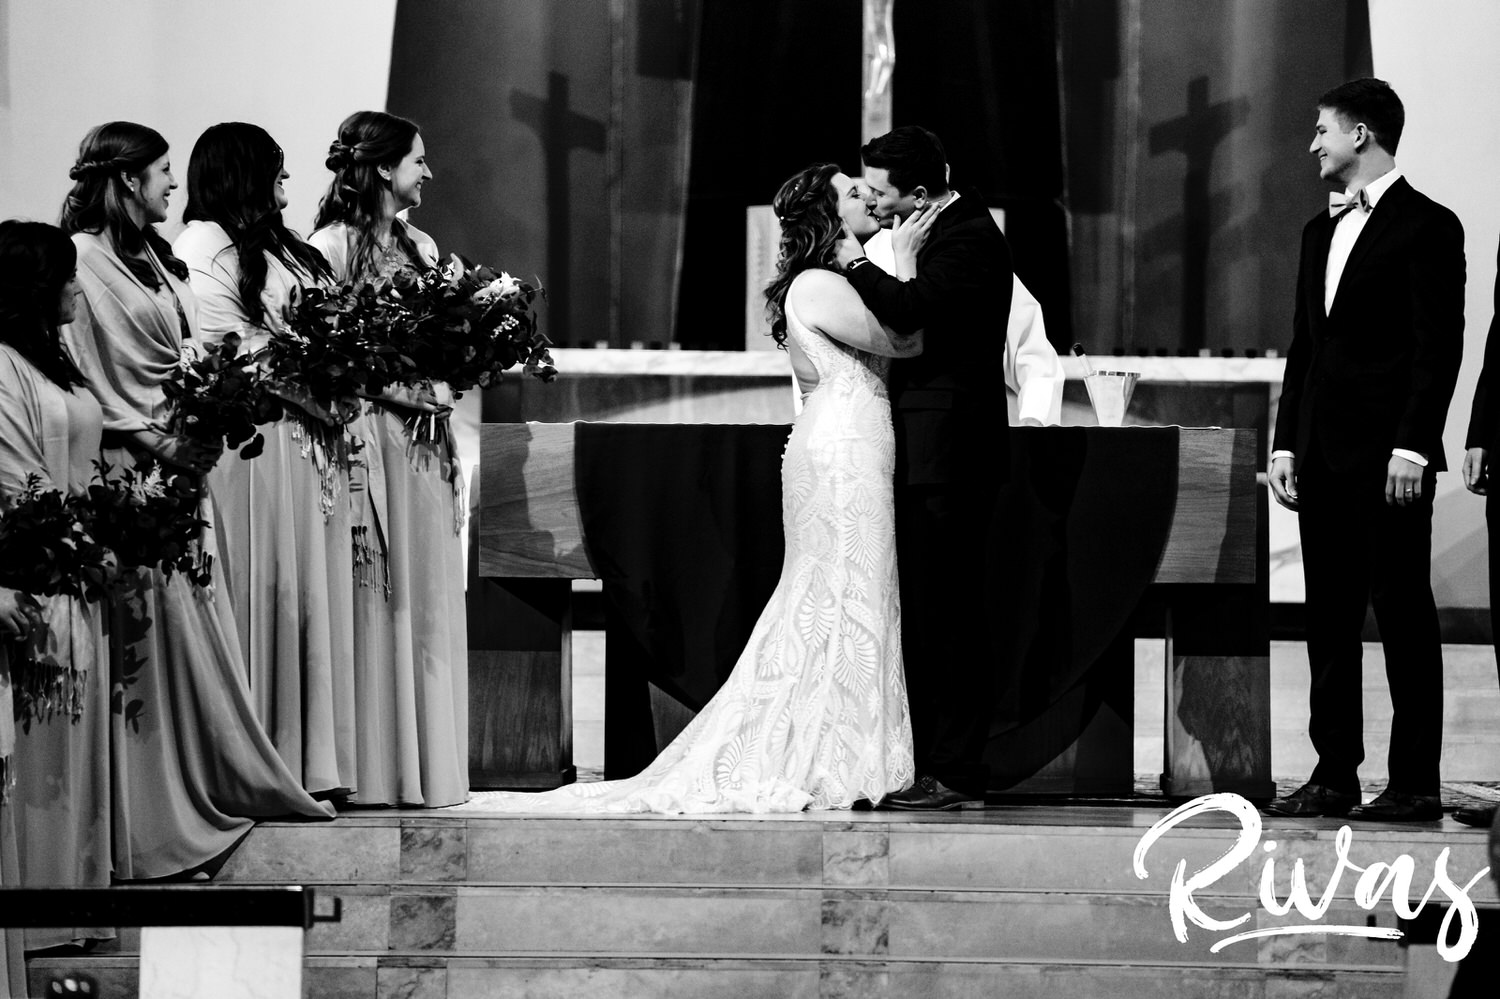 A candid black and white picture of a bride and groom sharing their first kiss during their wedding ceremony. 